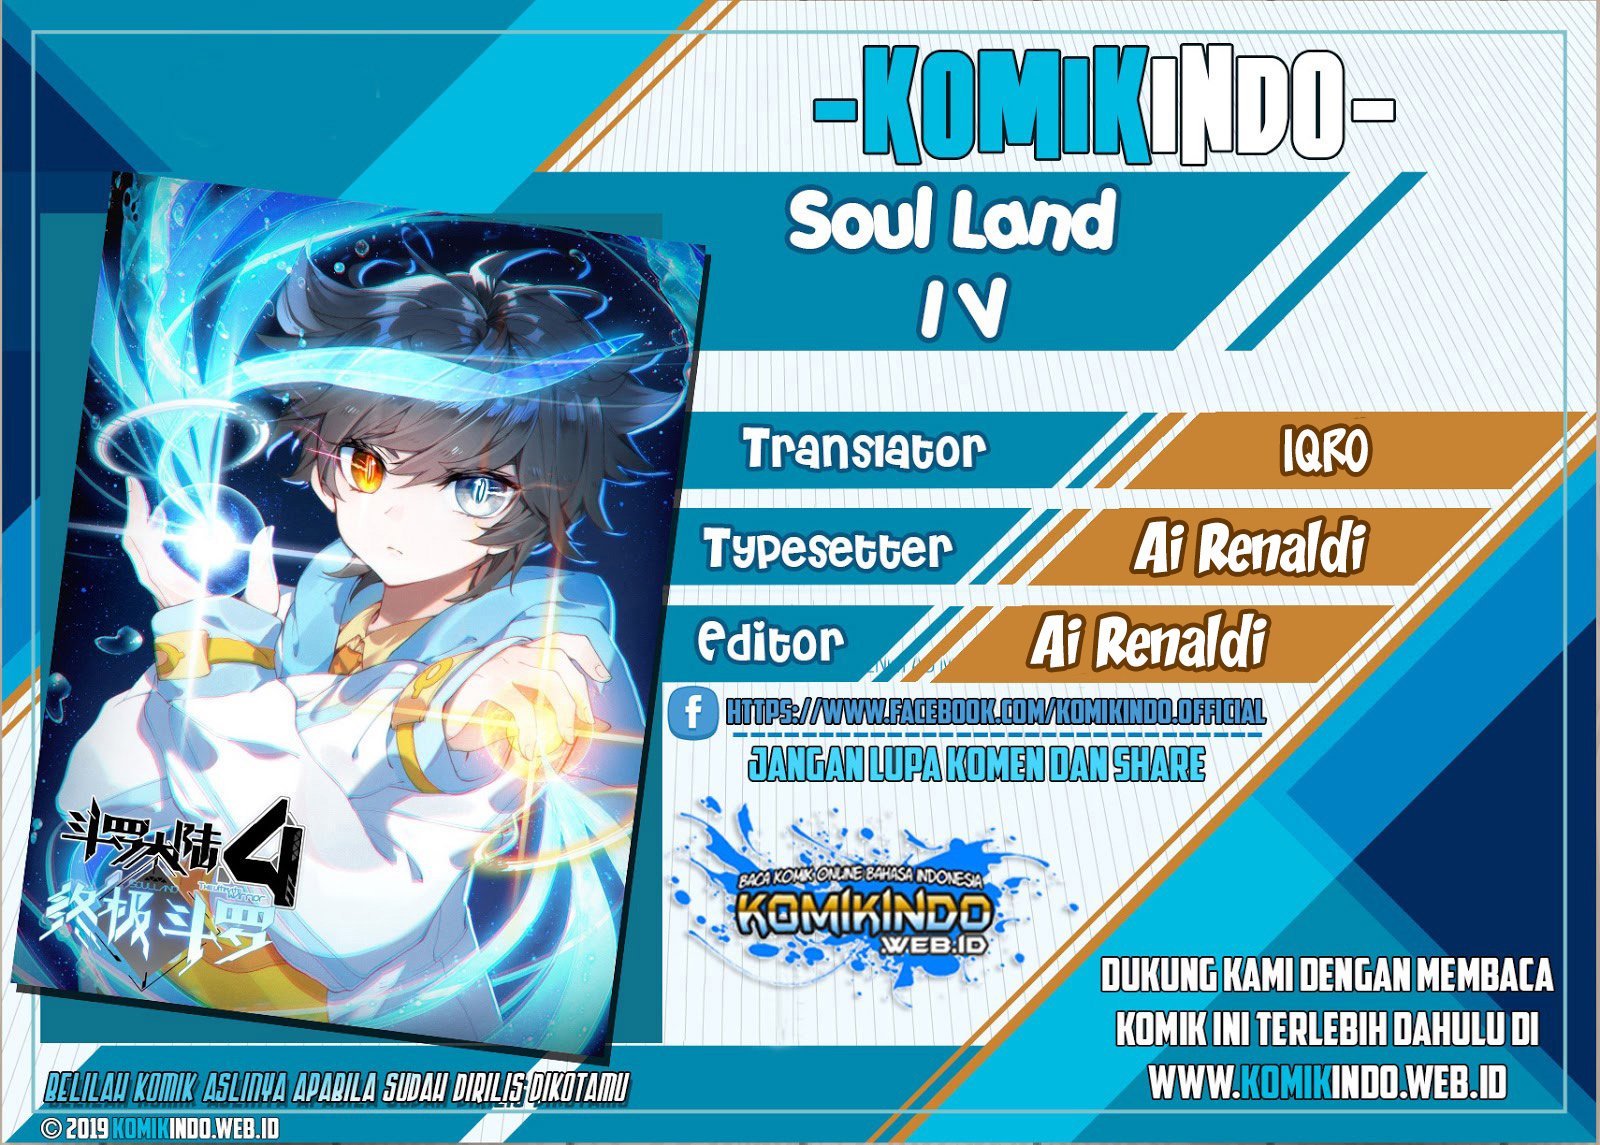 Soul Land IV – The Ultimate Combat Chapter 61